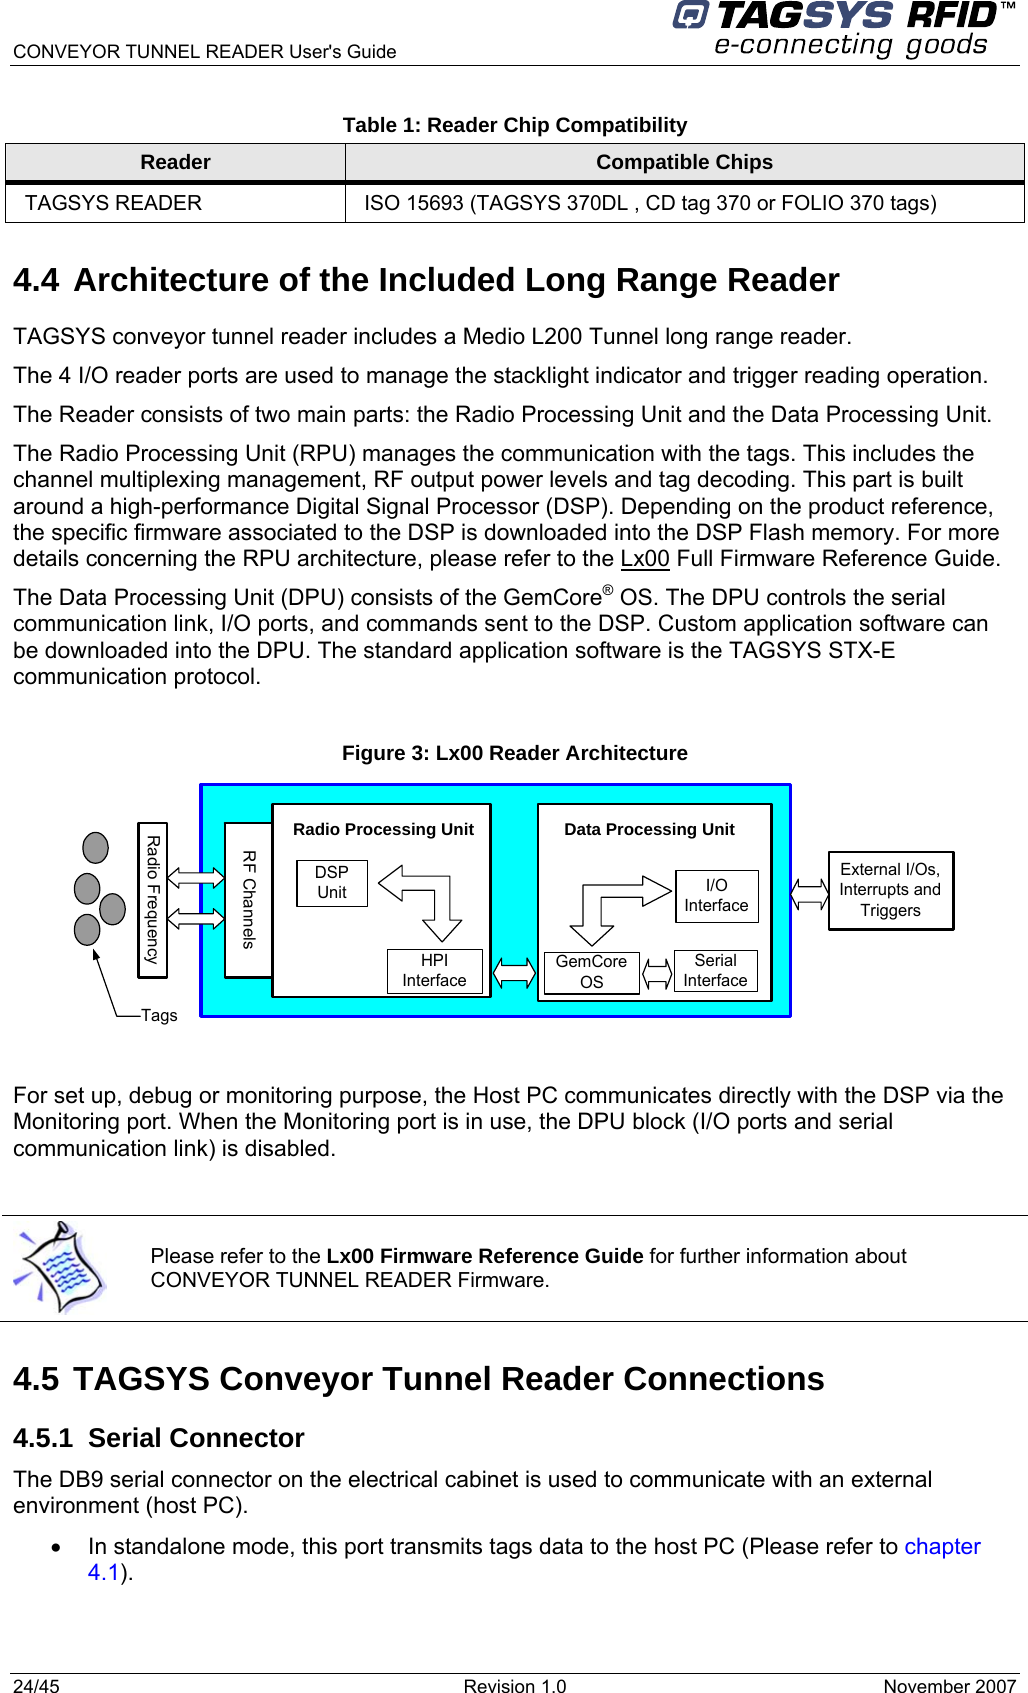  CONVEYOR TUNNEL READER User&apos;s Guide 24/45  Revision 1.0  November 2007  Table 1: Reader Chip Compatibility Reader  Compatible Chips TAGSYS READER  ISO 15693 (TAGSYS 370DL , CD tag 370 or FOLIO 370 tags) 4.4 Architecture of the Included Long Range Reader TAGSYS conveyor tunnel reader includes a Medio L200 Tunnel long range reader. The 4 I/O reader ports are used to manage the stacklight indicator and trigger reading operation. The Reader consists of two main parts: the Radio Processing Unit and the Data Processing Unit. The Radio Processing Unit (RPU) manages the communication with the tags. This includes the channel multiplexing management, RF output power levels and tag decoding. This part is built around a high-performance Digital Signal Processor (DSP). Depending on the product reference, the specific firmware associated to the DSP is downloaded into the DSP Flash memory. For more details concerning the RPU architecture, please refer to the Lx00 Full Firmware Reference Guide. The Data Processing Unit (DPU) consists of the GemCore® OS. The DPU controls the serial communication link, I/O ports, and commands sent to the DSP. Custom application software can be downloaded into the DPU. The standard application software is the TAGSYS STX-E communication protocol.  Figure 3: Lx00 Reader Architecture Data Processing UnitSerialInterfaceHPIInterfaceDSPUnitRF ChannelsGemCoreOSRadio Processing UnitRadio FrequencyI/OInterfaceExternal I/Os,Interrupts andTriggersTags  For set up, debug or monitoring purpose, the Host PC communicates directly with the DSP via the Monitoring port. When the Monitoring port is in use, the DPU block (I/O ports and serial communication link) is disabled.  4.5 TAGSYS Conveyor Tunnel Reader Connections 4.5.1 Serial Connector The DB9 serial connector on the electrical cabinet is used to communicate with an external environment (host PC).  •  In standalone mode, this port transmits tags data to the host PC (Please refer to chapter 4.1).  Please refer to the Lx00 Firmware Reference Guide for further information about CONVEYOR TUNNEL READER Firmware. 